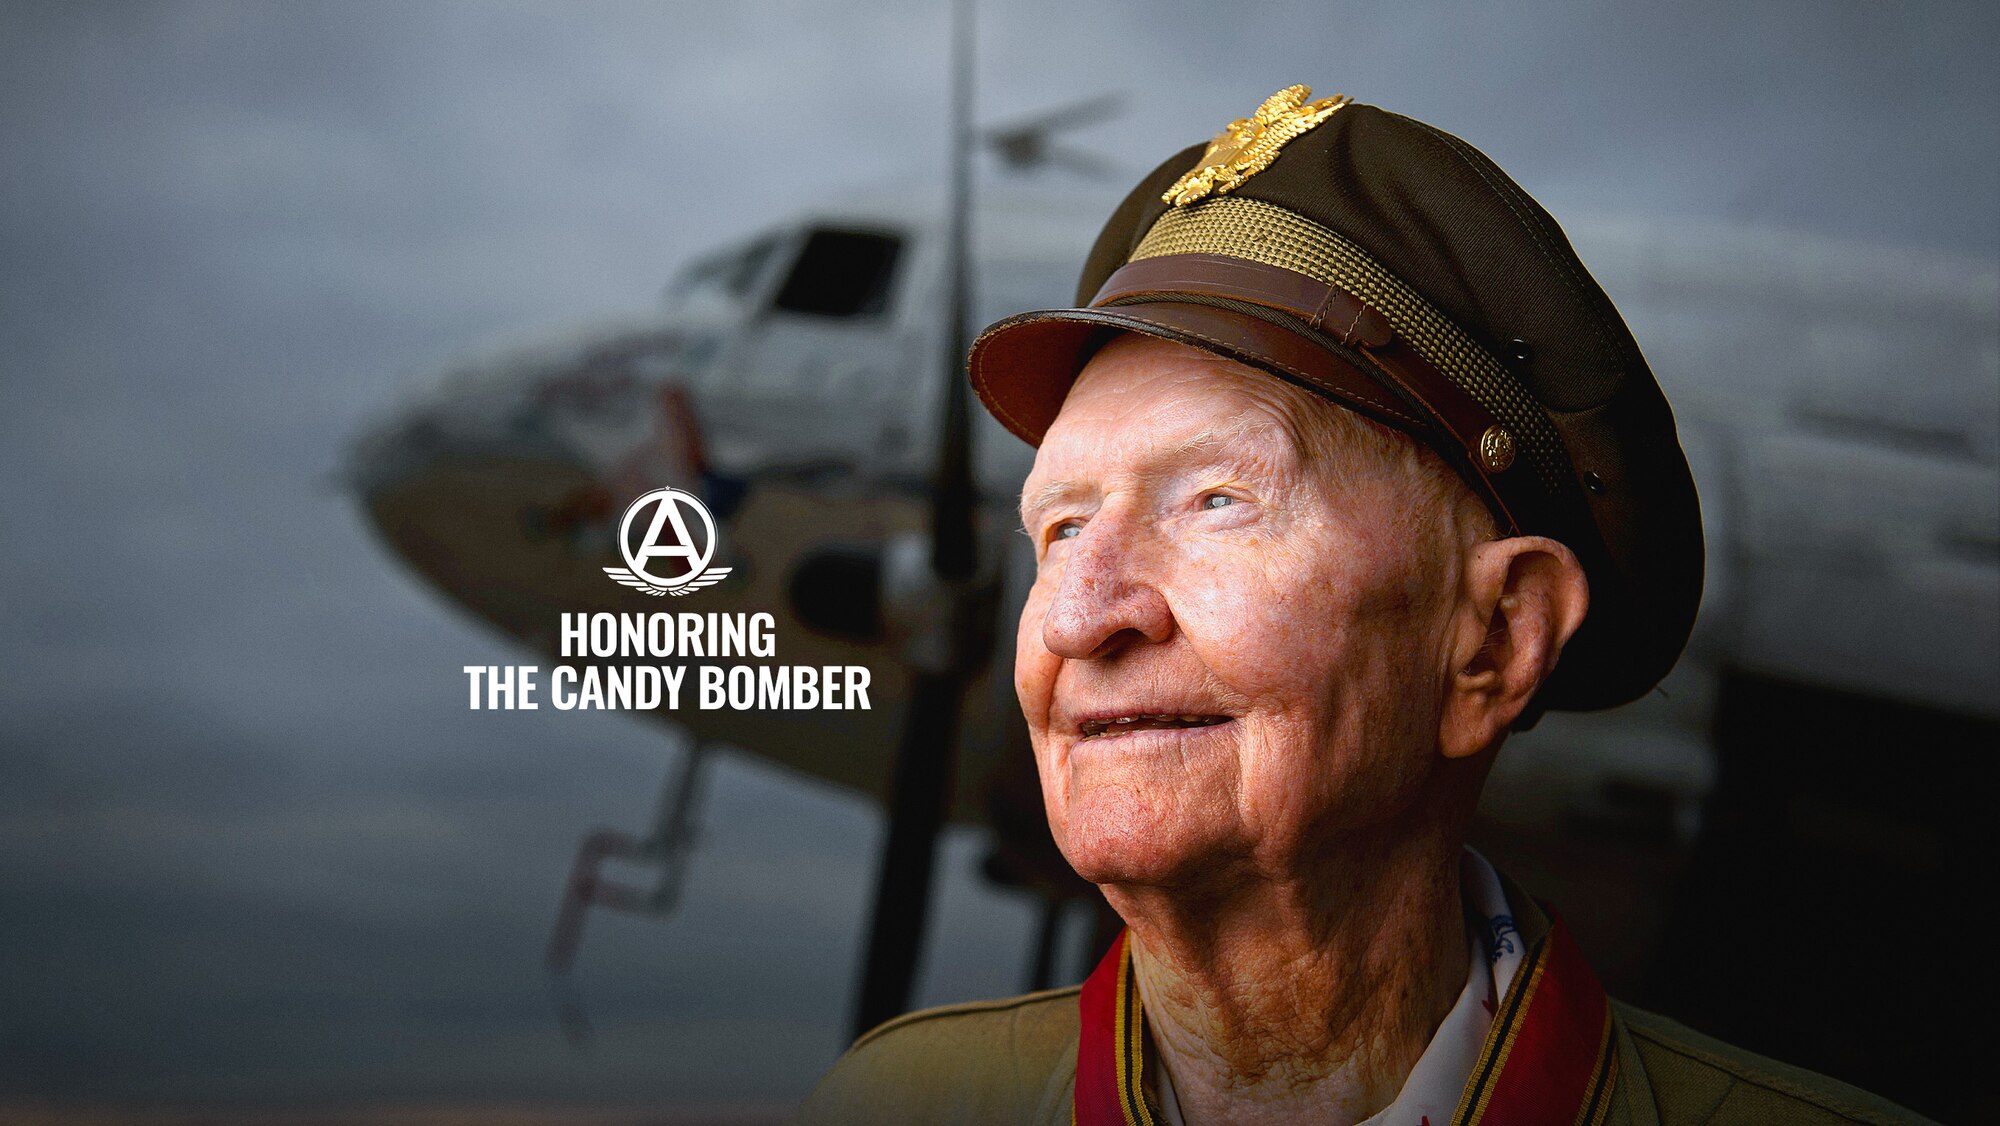 Honoring the Candy Bomber